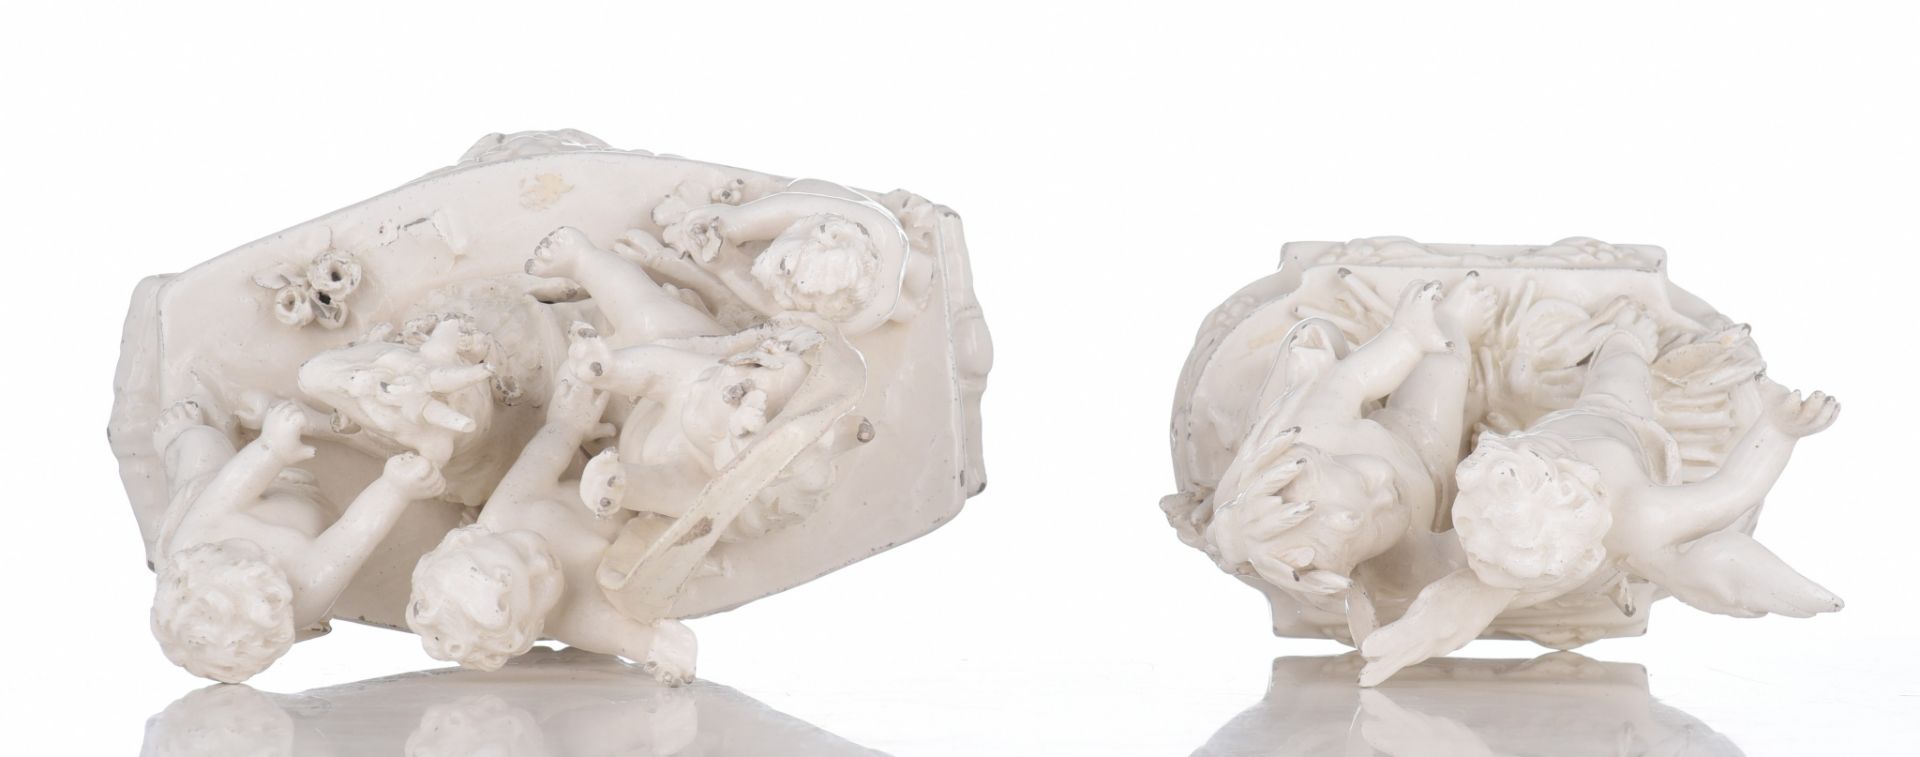 (BIDDING ONLY ON CARLOBONTE.BE) Two white glazed Capodimonte figural groups, Naples, H 20 - 23 cm - Image 6 of 16